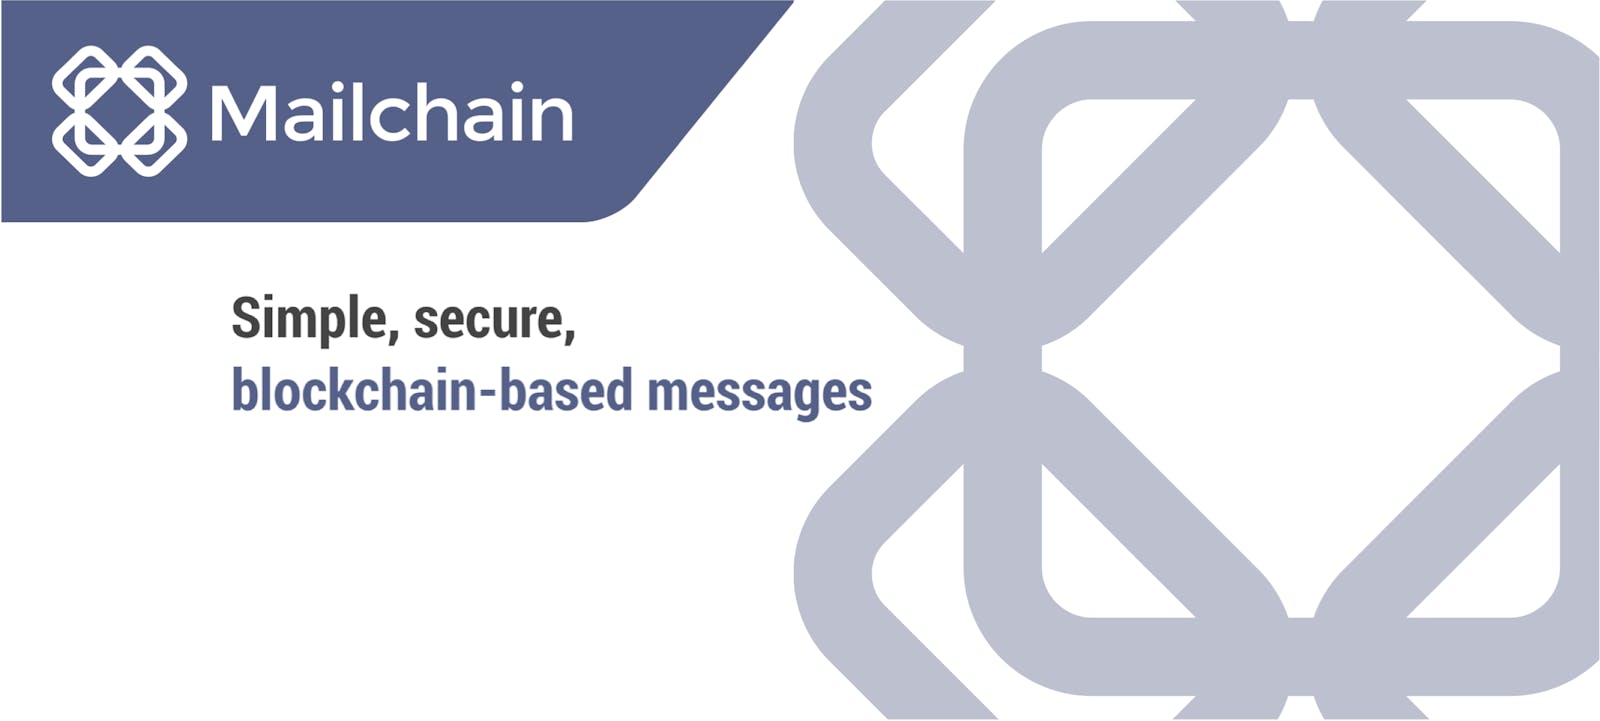 Getting started with Mailchain: A step-by-step guide